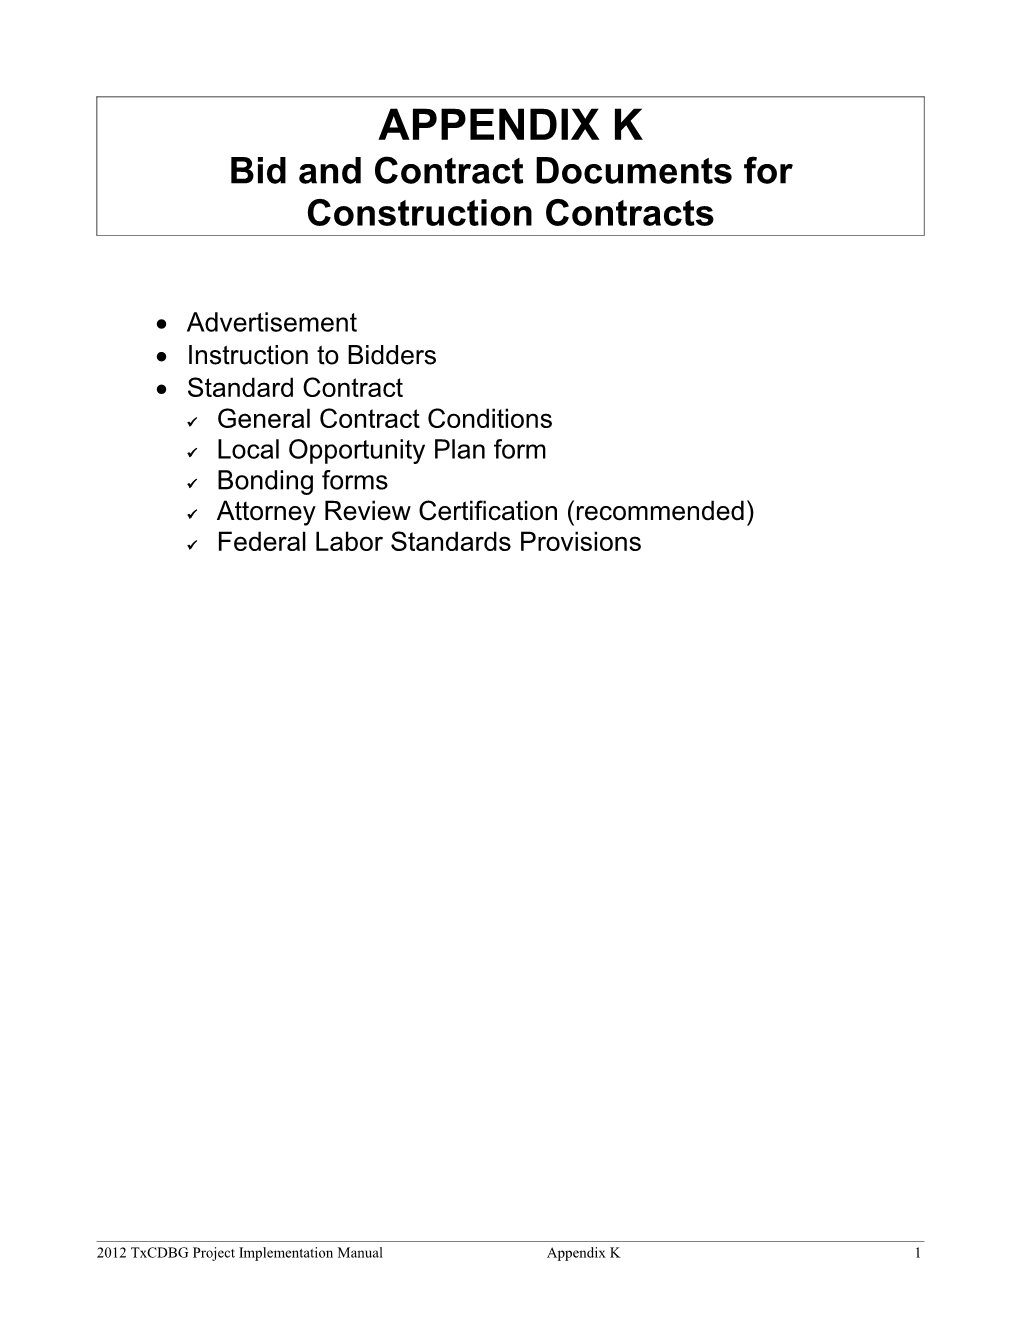 Bid and Contract Documents For